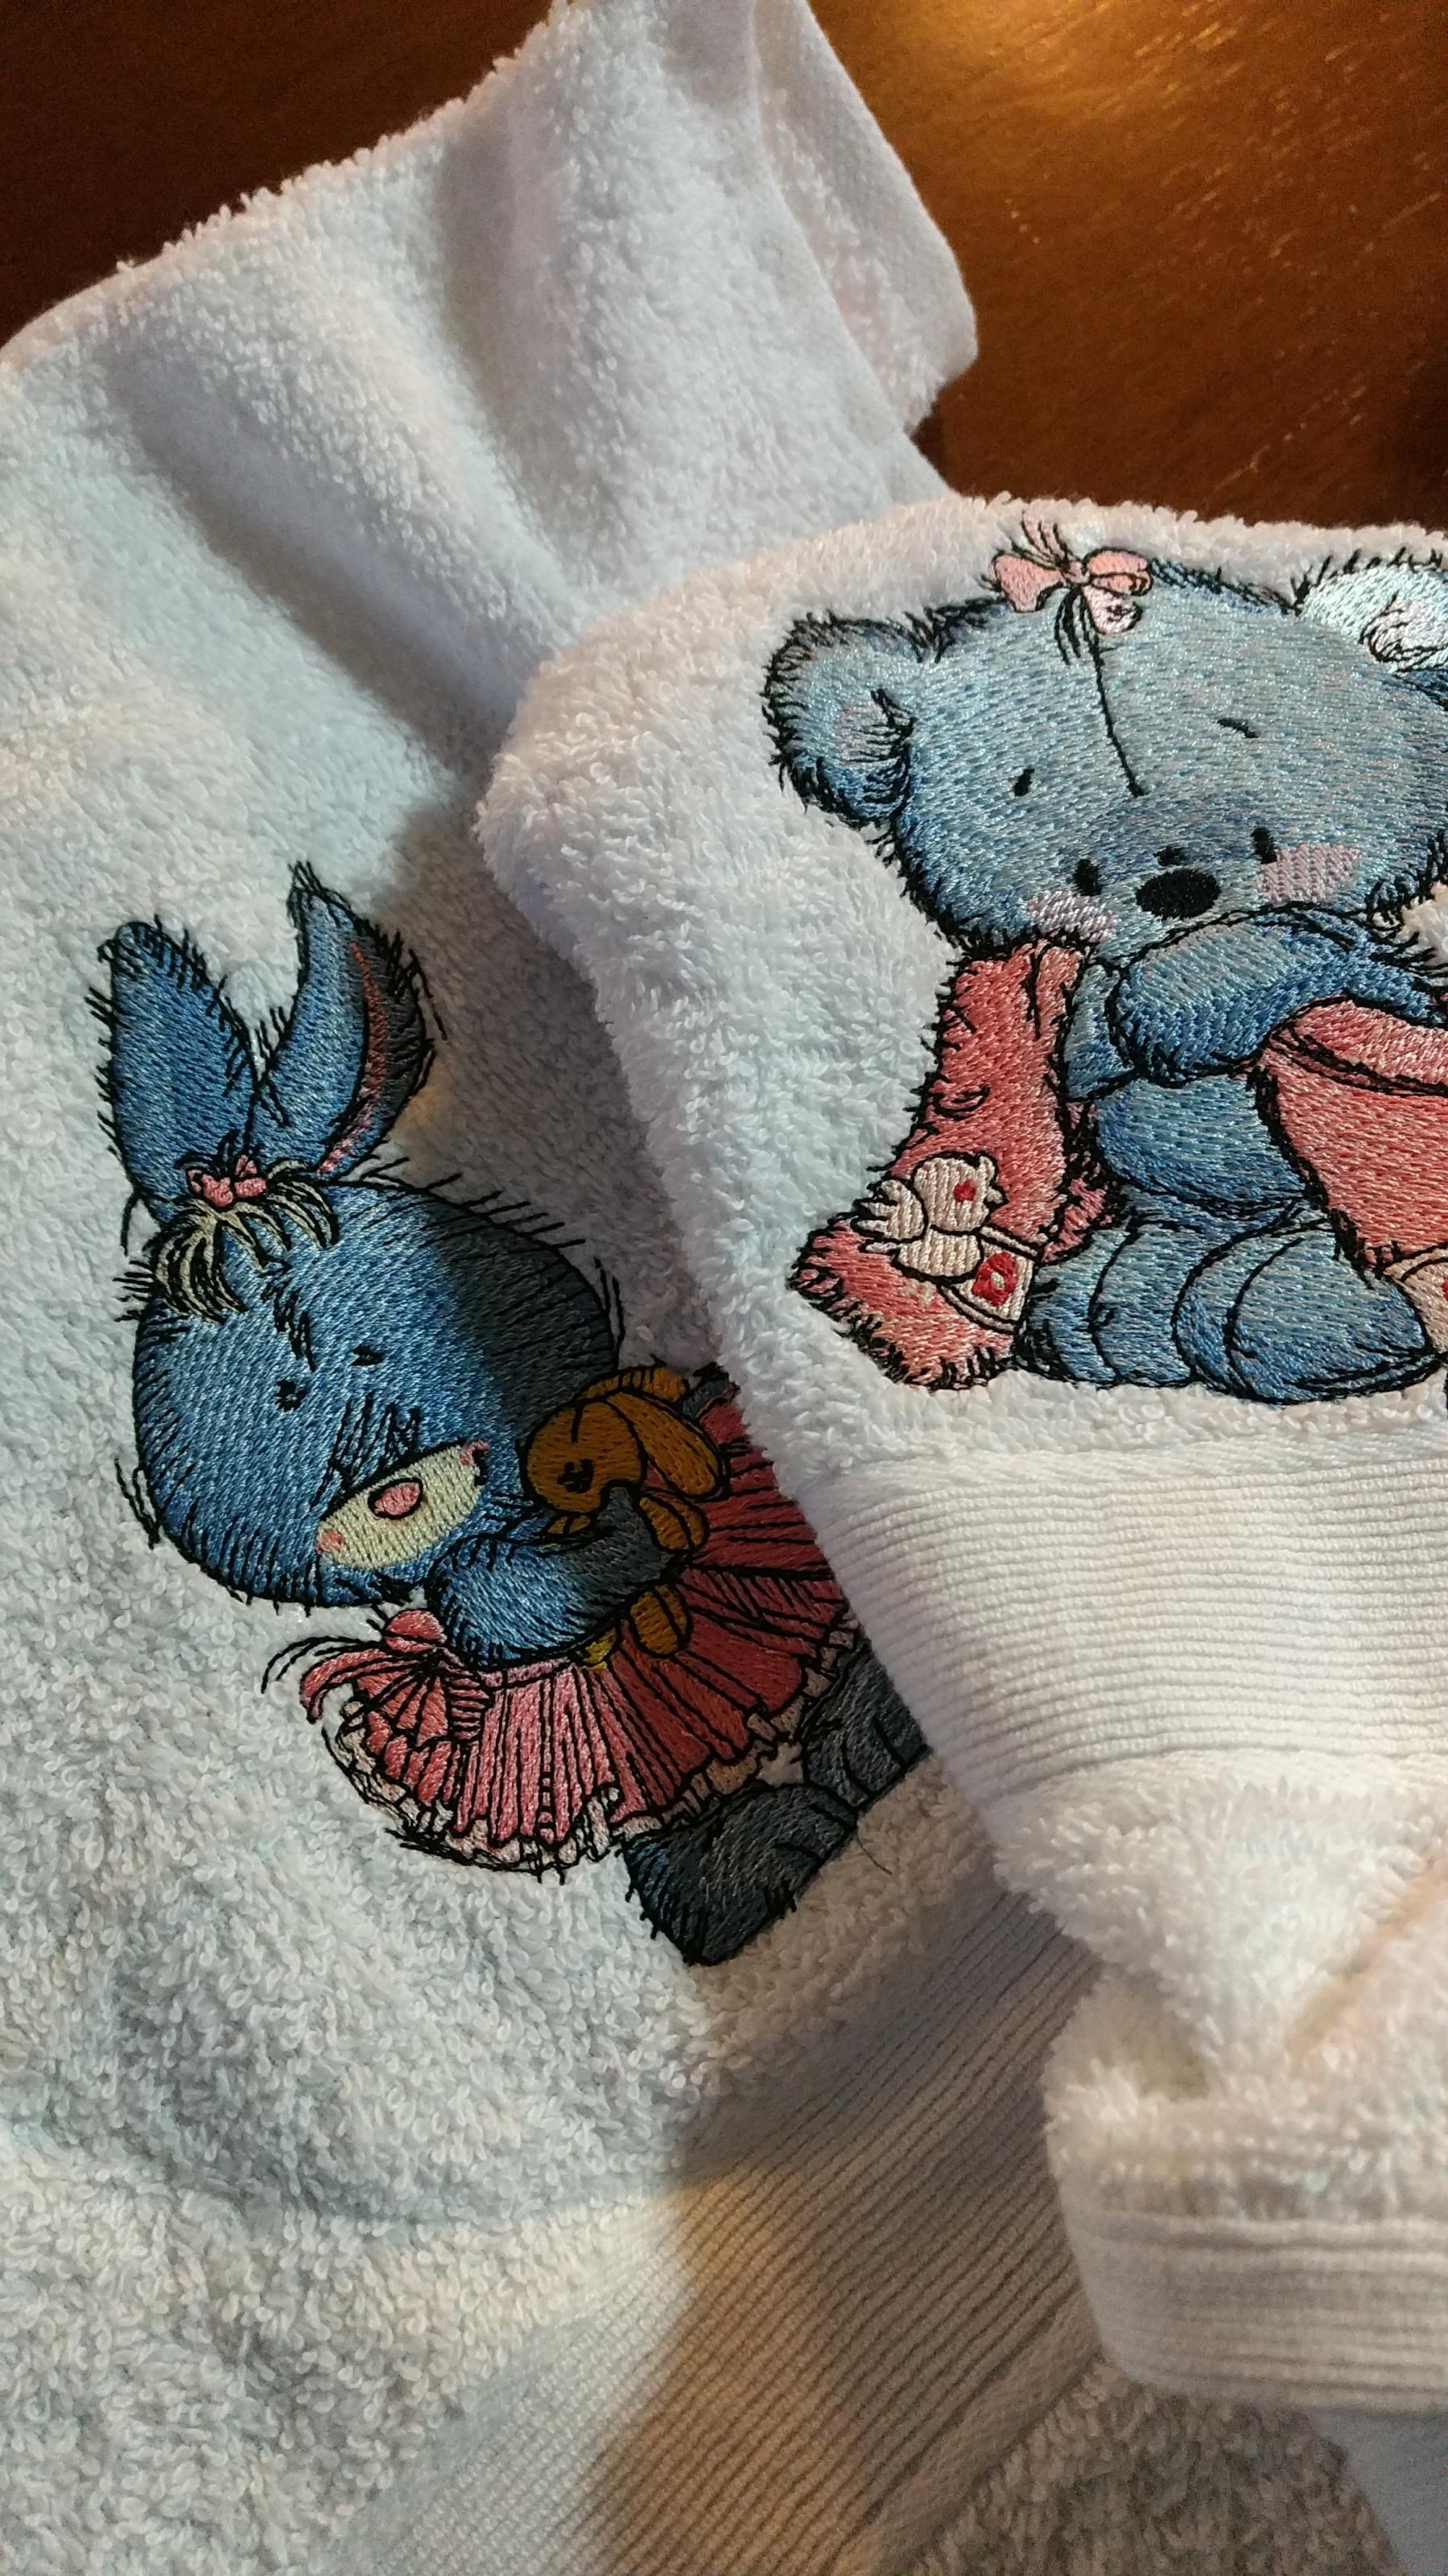 Embroidered towels with Teddy bear and bunny